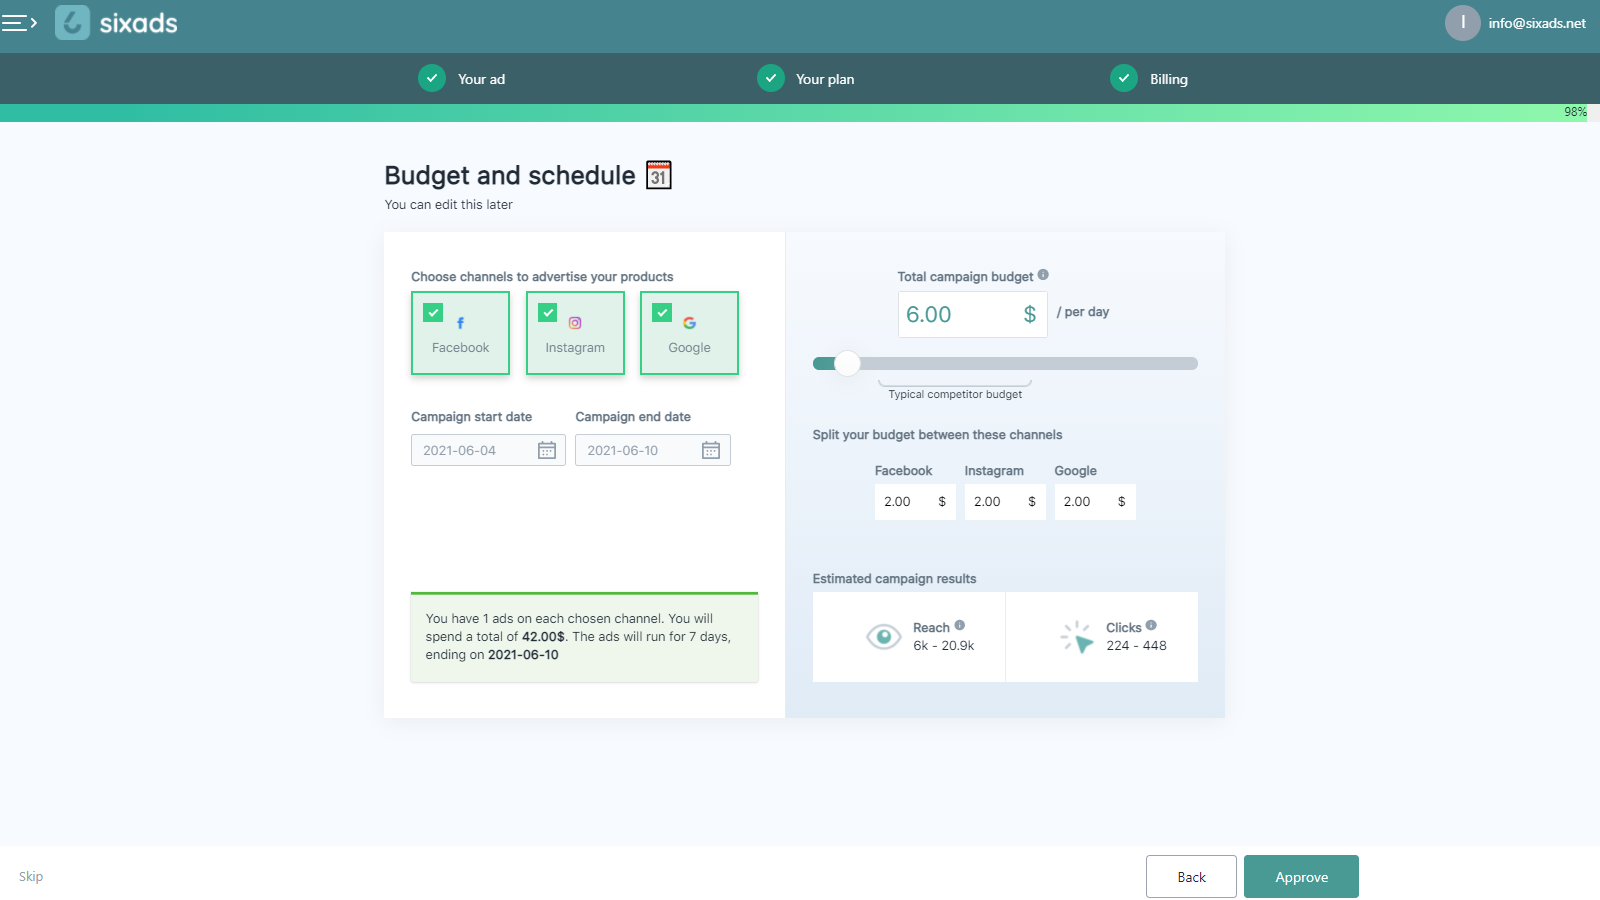 The app lets you adjust your budget and schedule your ads on 3 platforms at ease